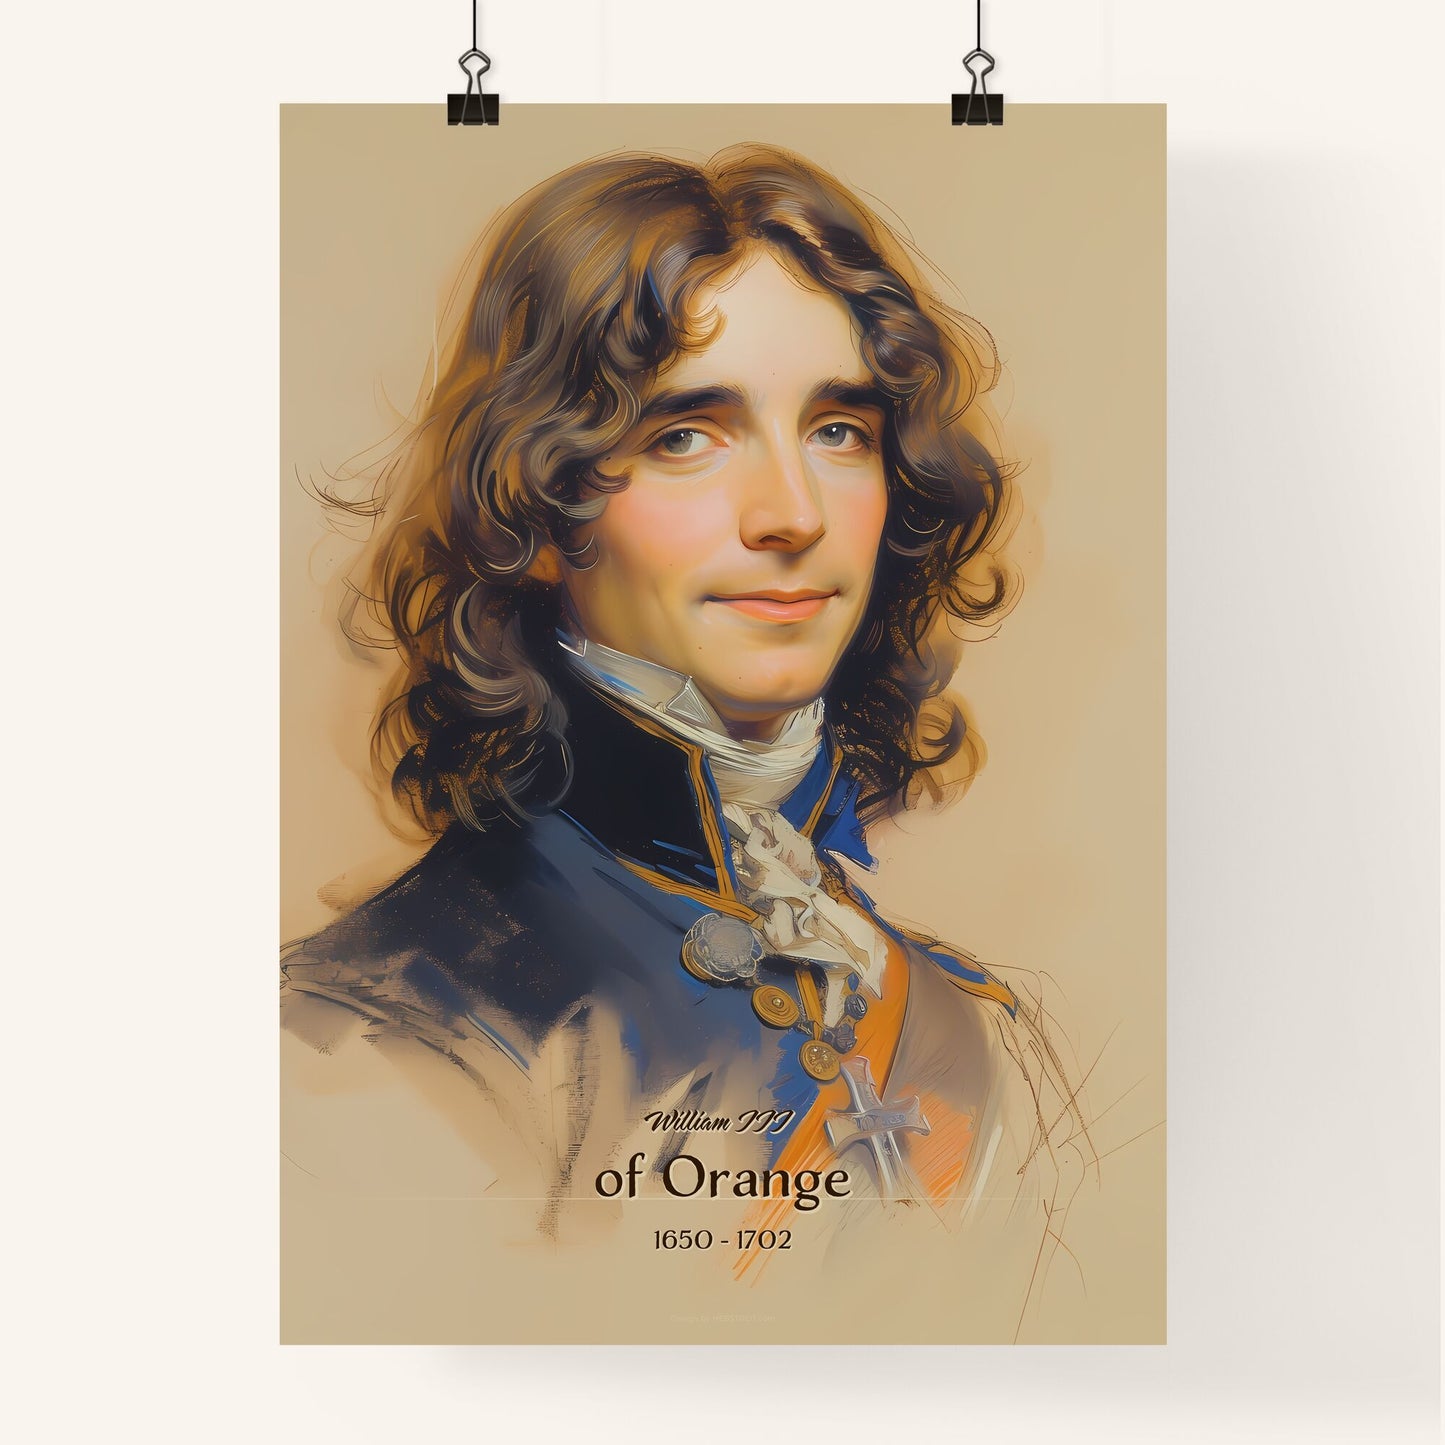 William III, of Orange, 1650 - 1702, A Poster of a man with long hair wearing a blue coat Default Title